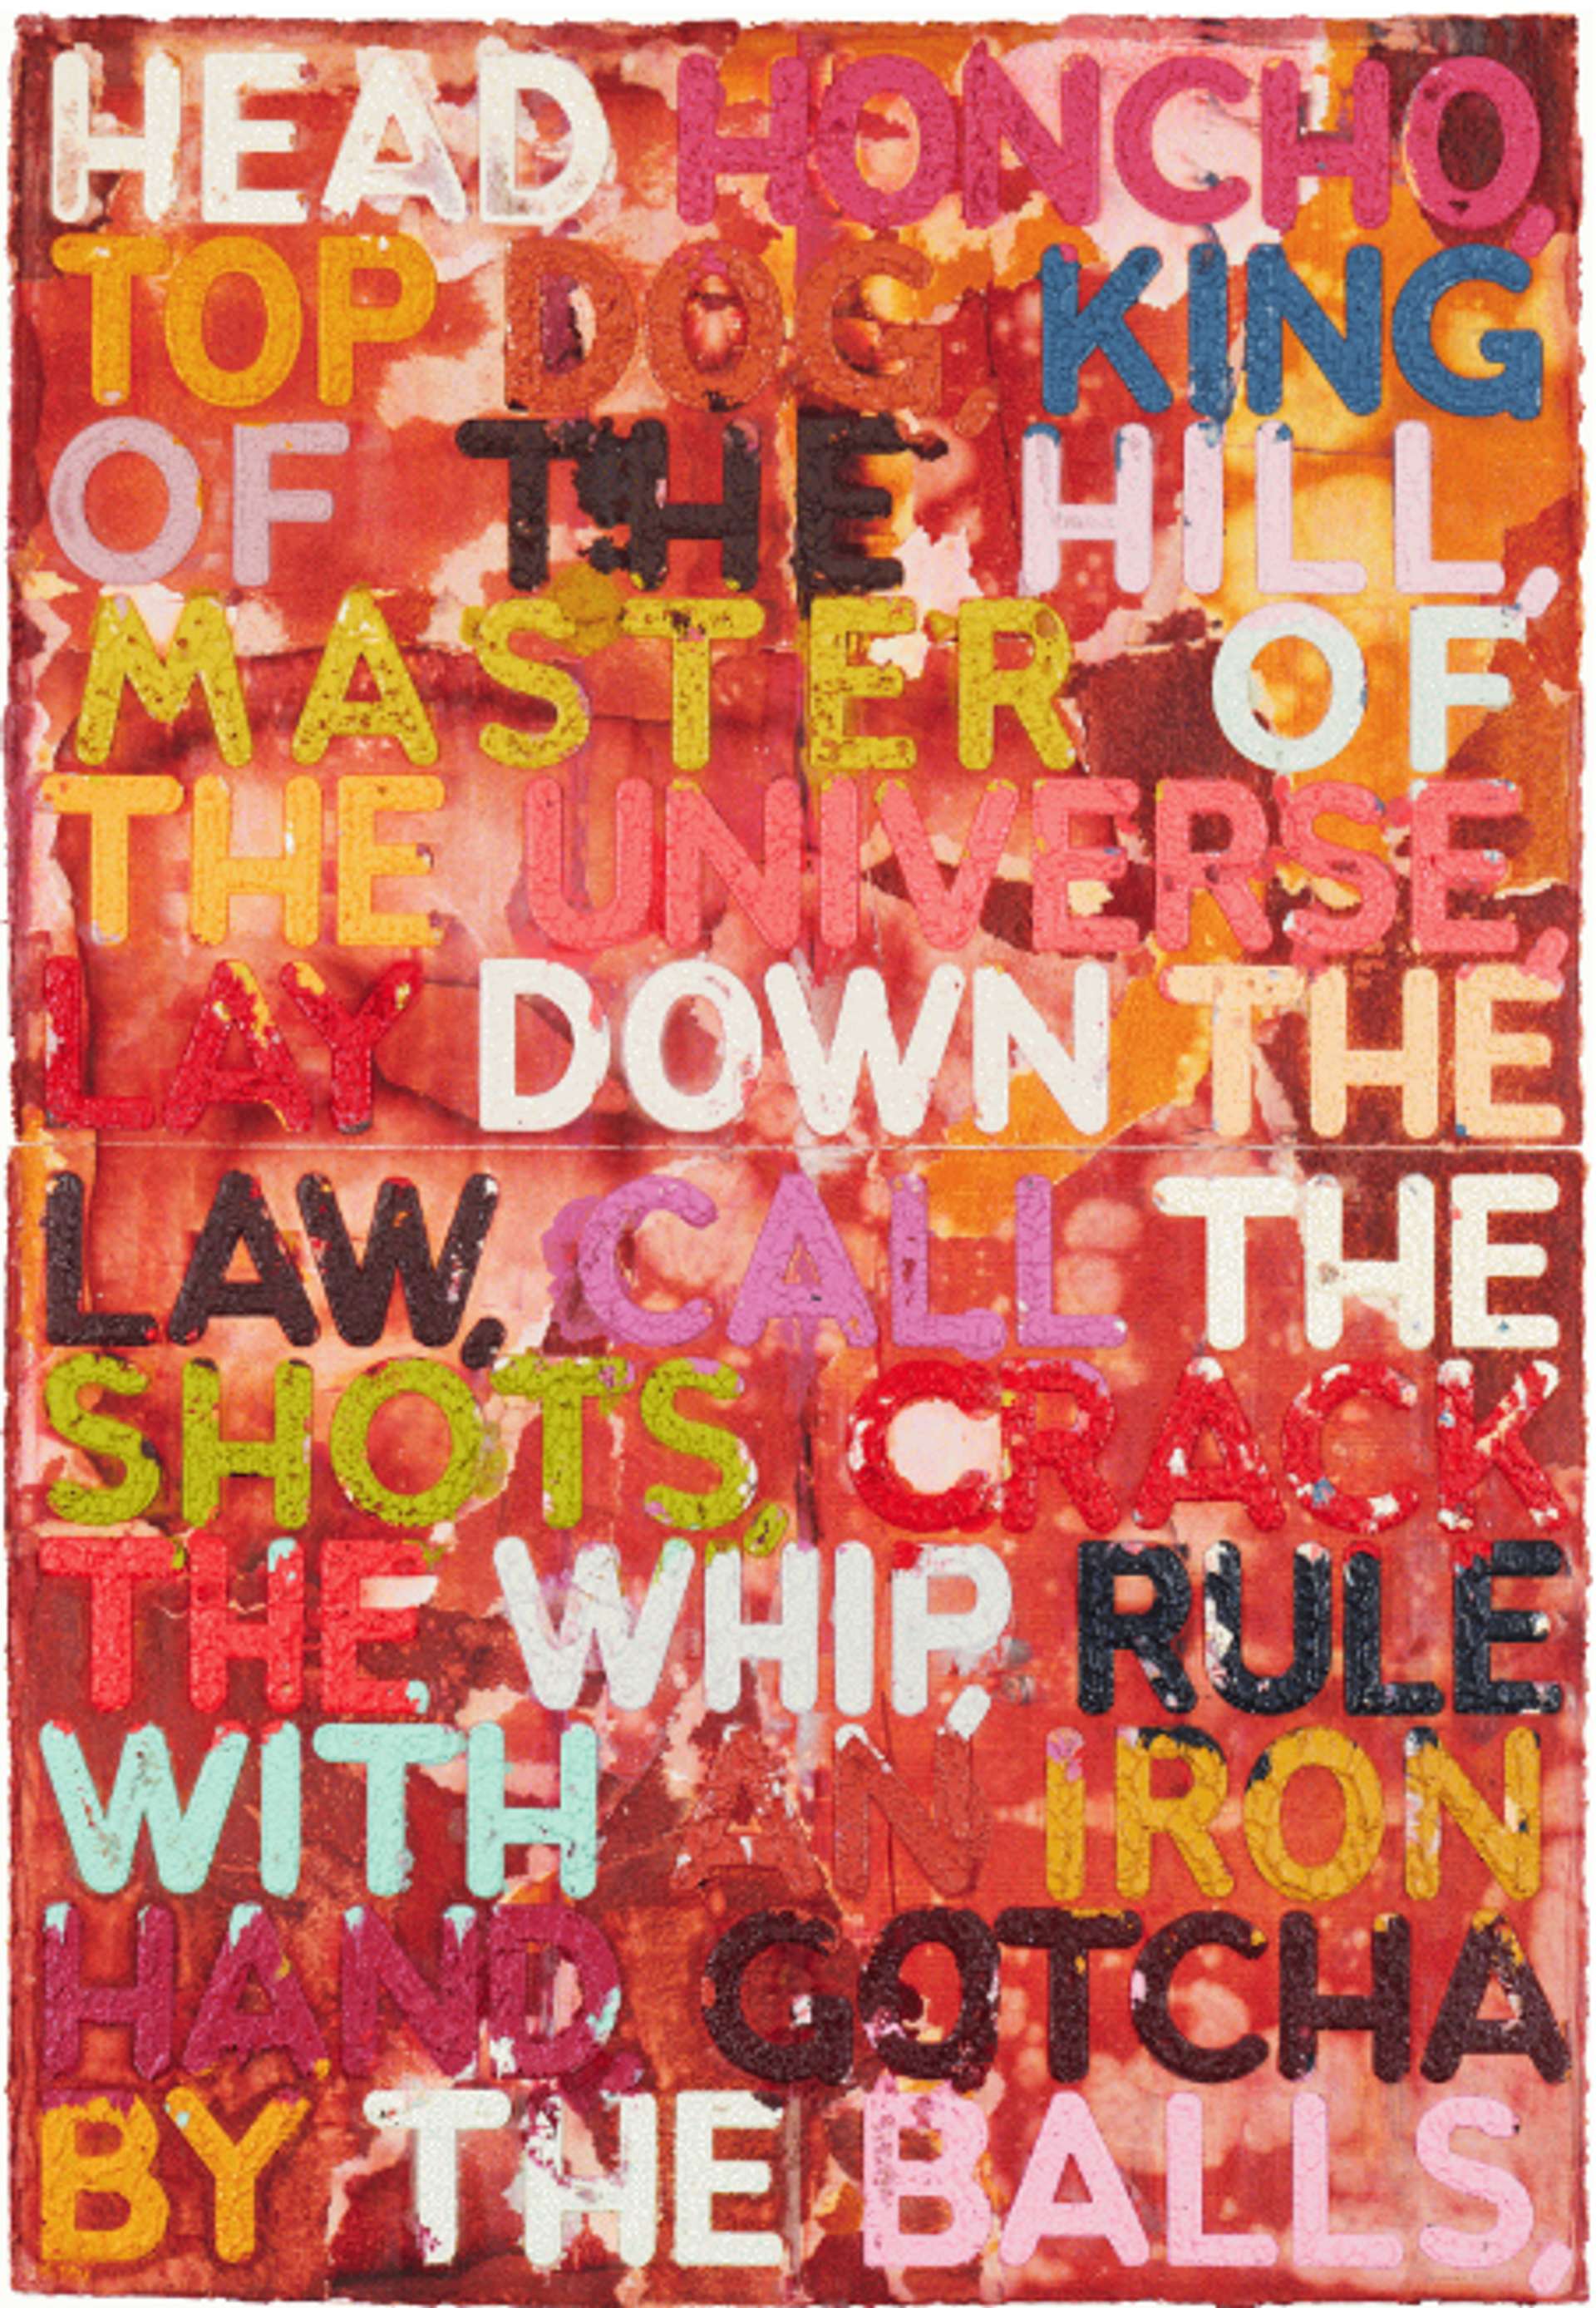 Bold, large letters dominate the canvas, presenting titles that evoke authority, control, and action. These phrases are arranged from the top left corner to the bottom right, capturing attention and commanding presence. The warm-toned abstract background adds depth and visual interest, complementing the powerful nature of the text.